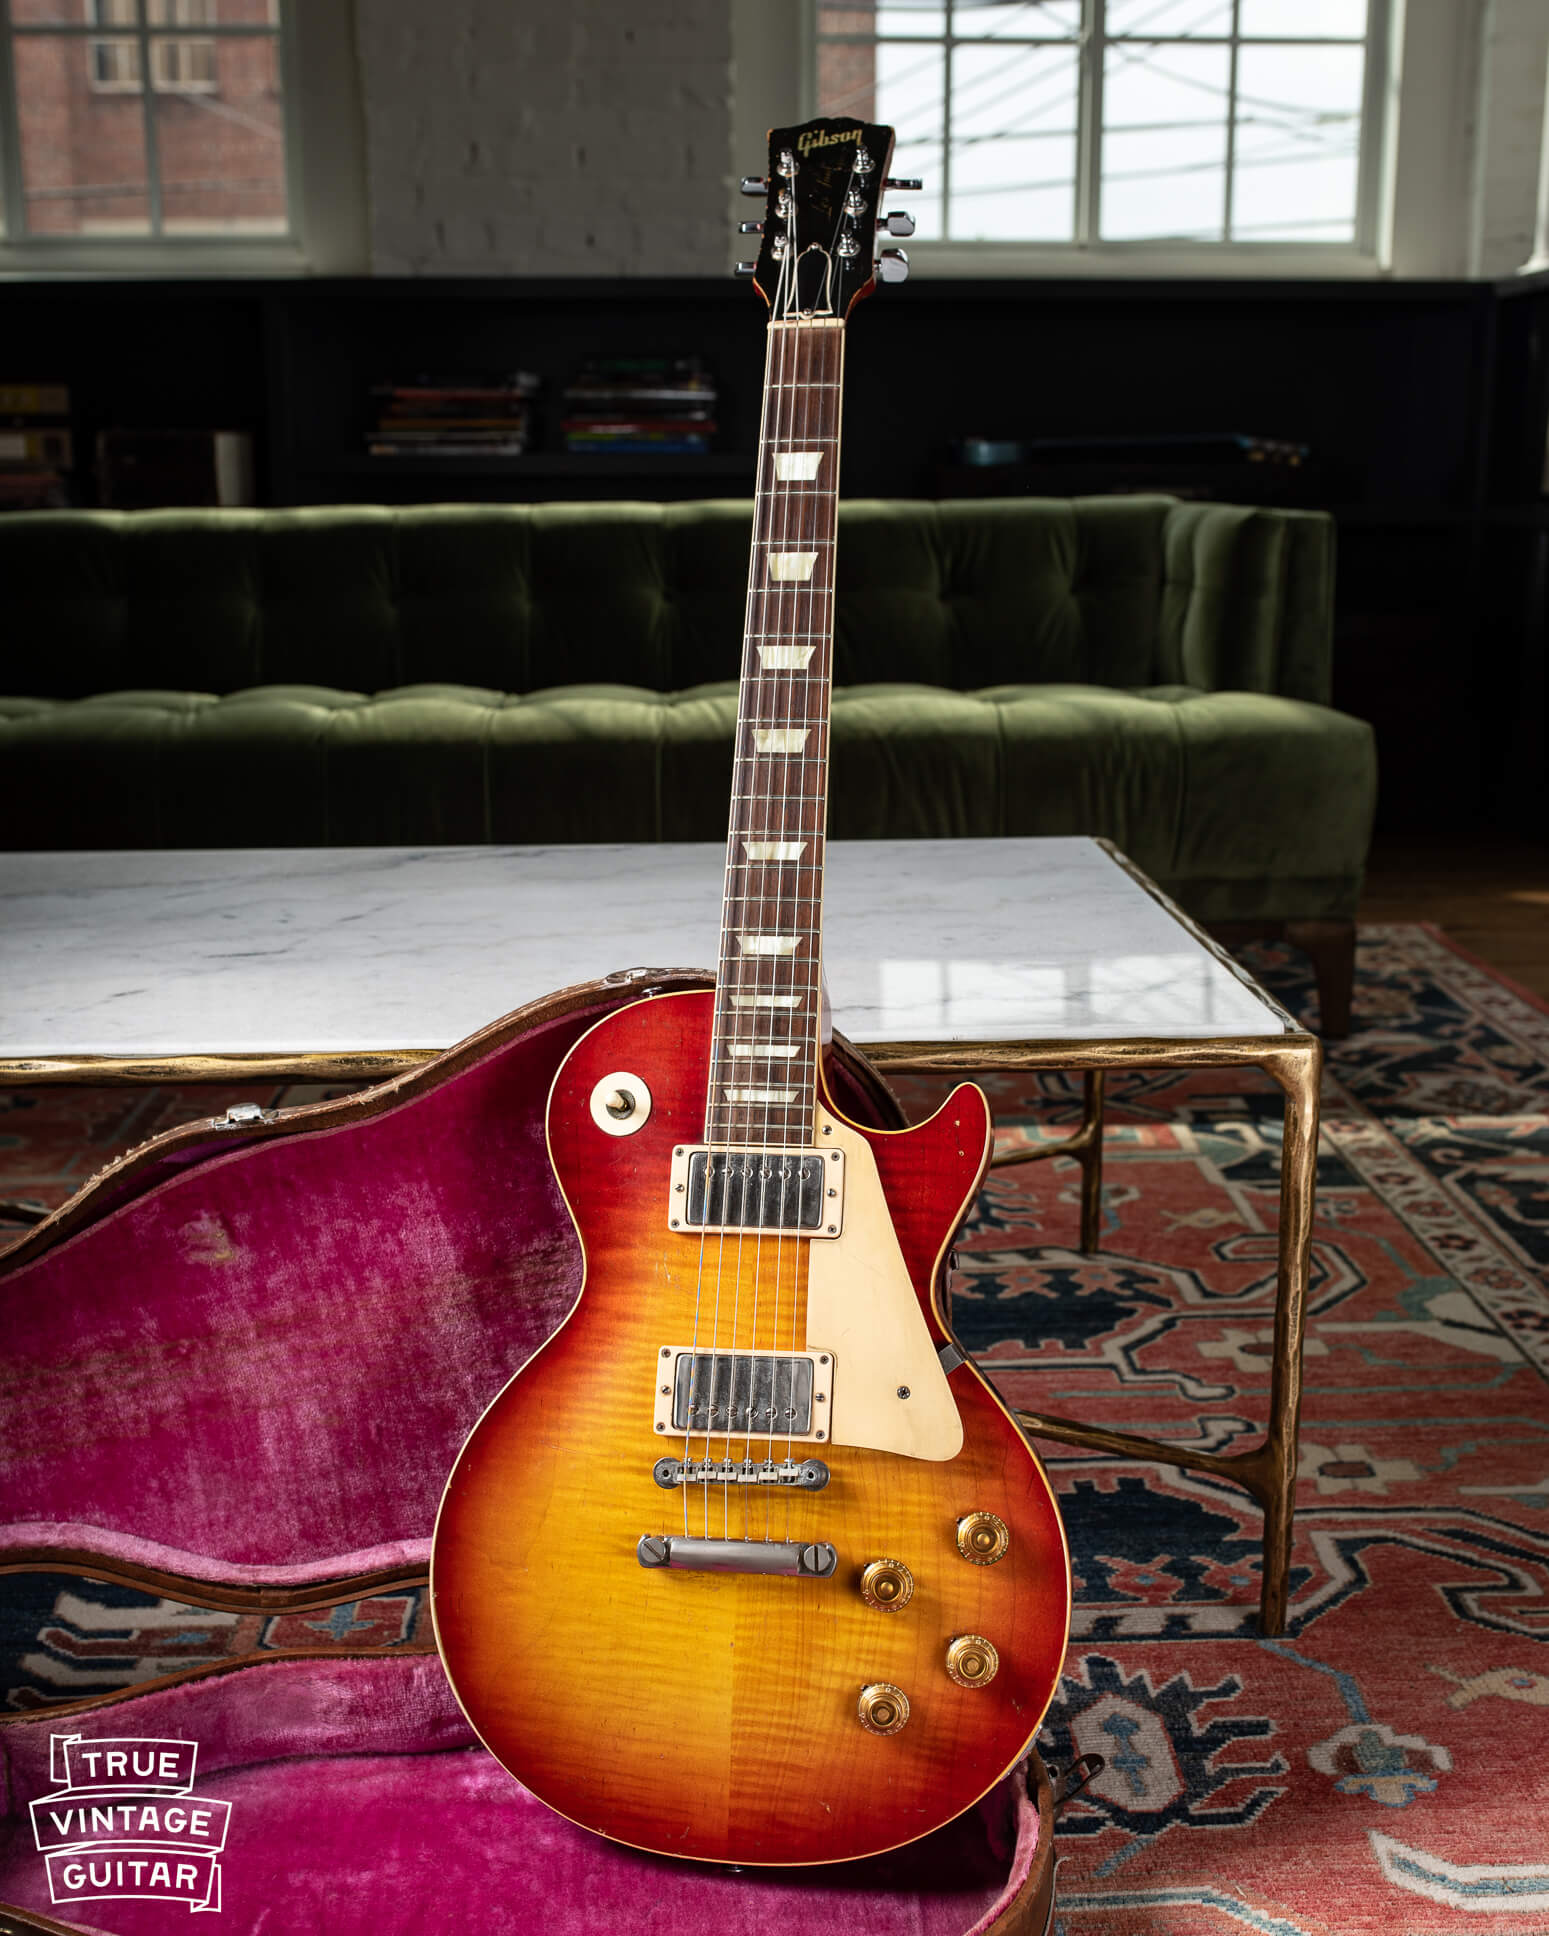 Gibson Les Paul Model with Cherry Sunburst finish made in 1958